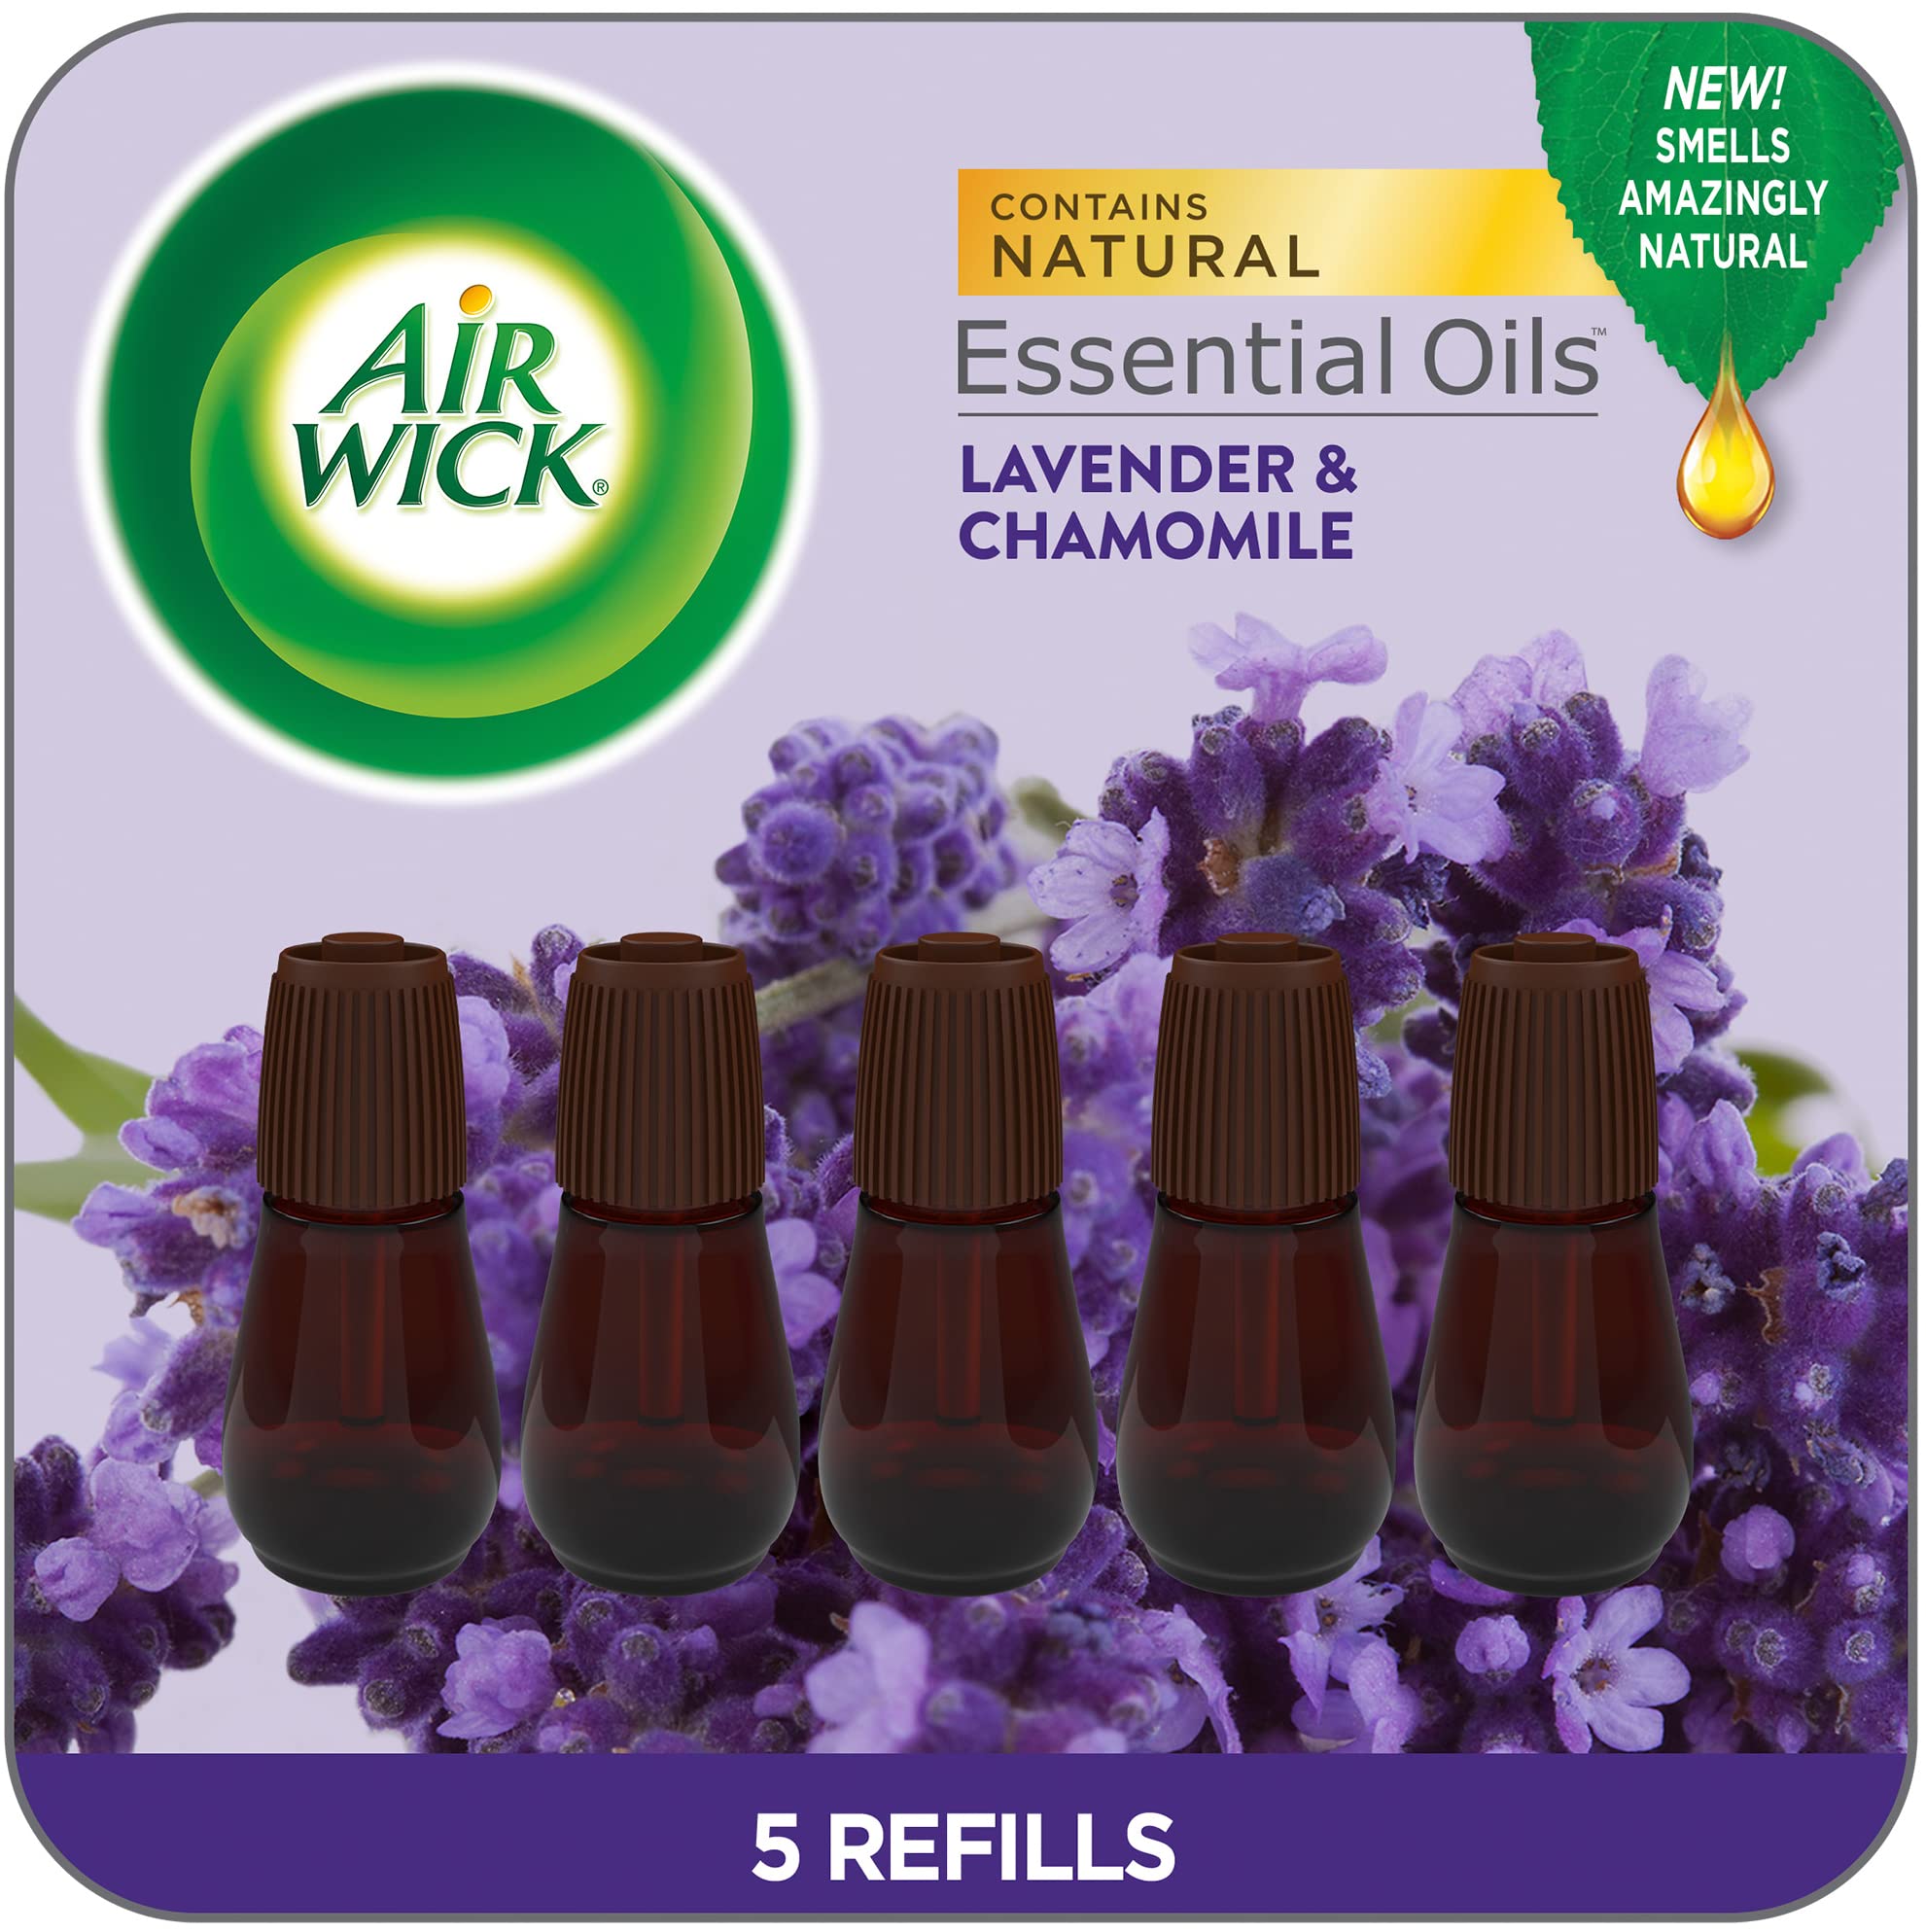 Air Wick Essential Mist Refill, 5 ct, Lavender and Almond Blossom, Essential  Oils Diffuser, Air Freshener